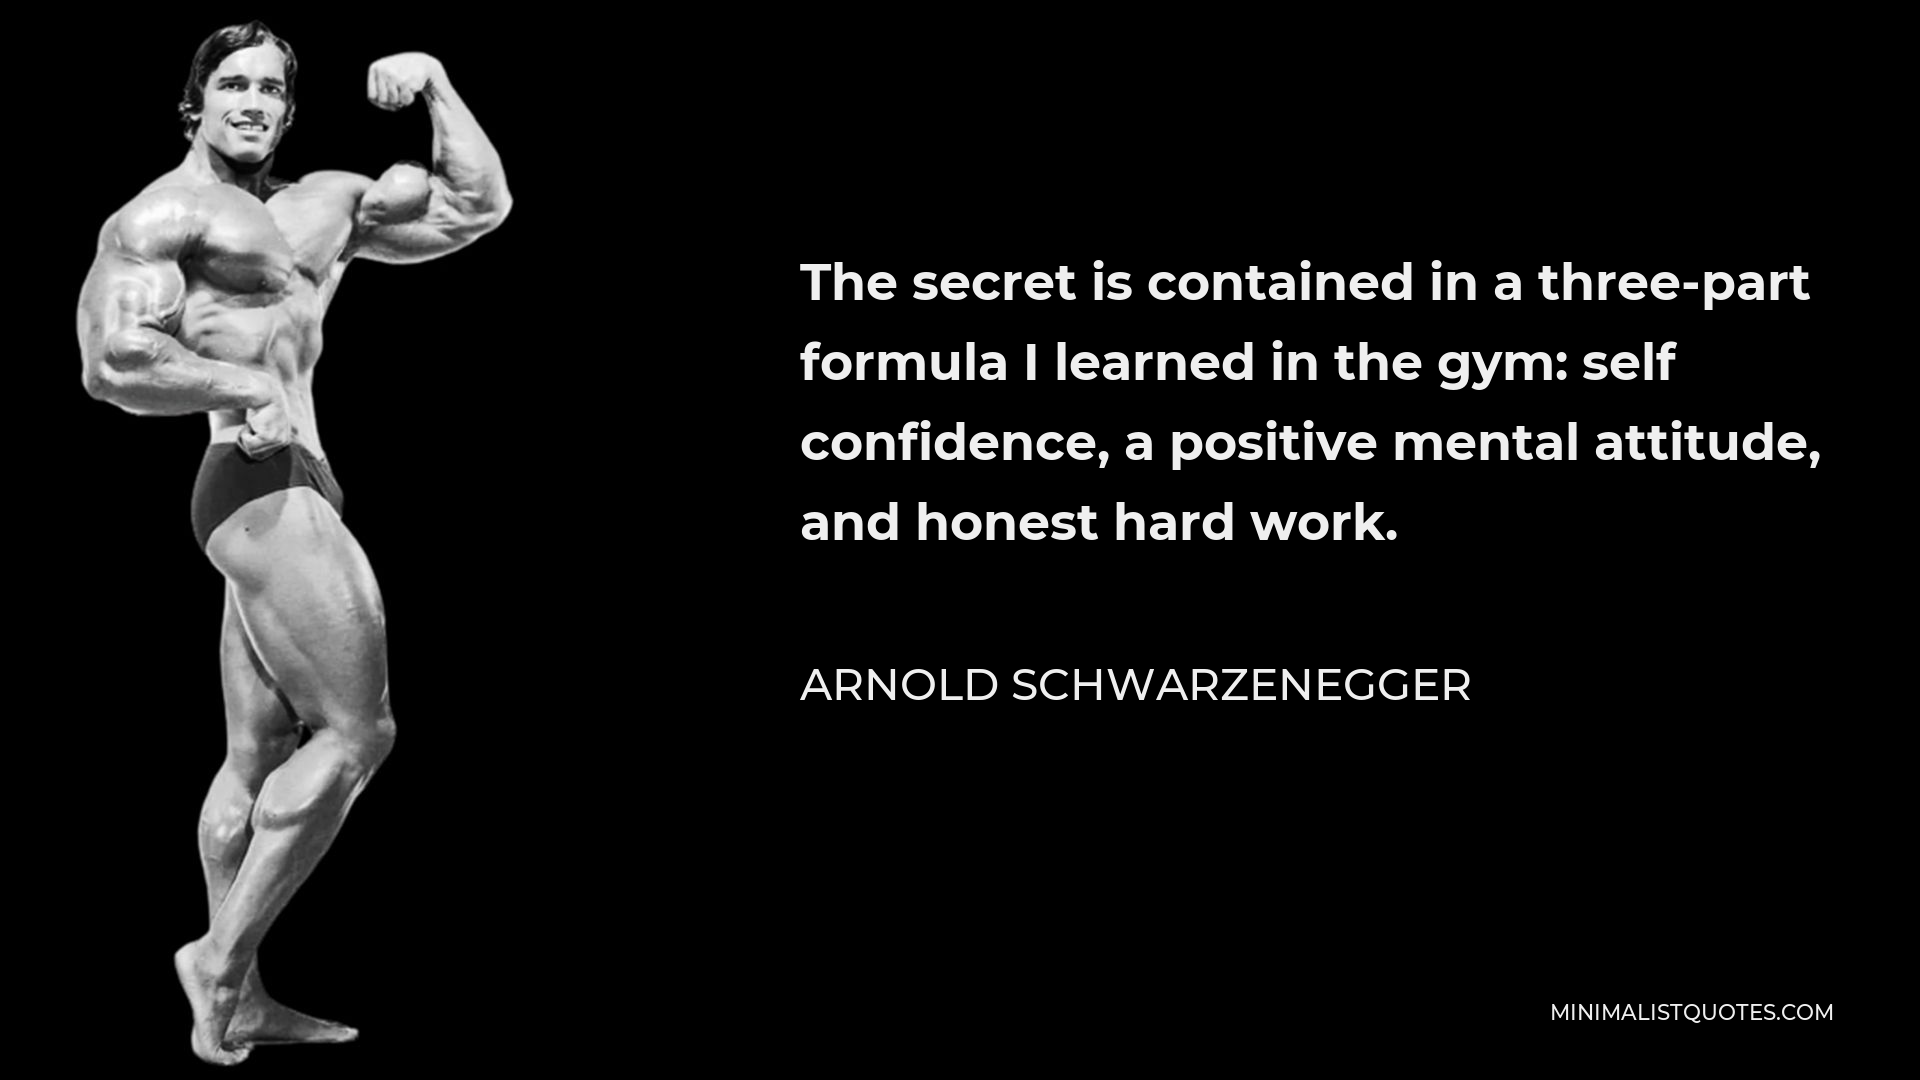 Arnold Schwarzenegger Quote - The secret is contained in a three-part formula I learned in the gym: self confidence, a positive mental attitude, and honest hard work.